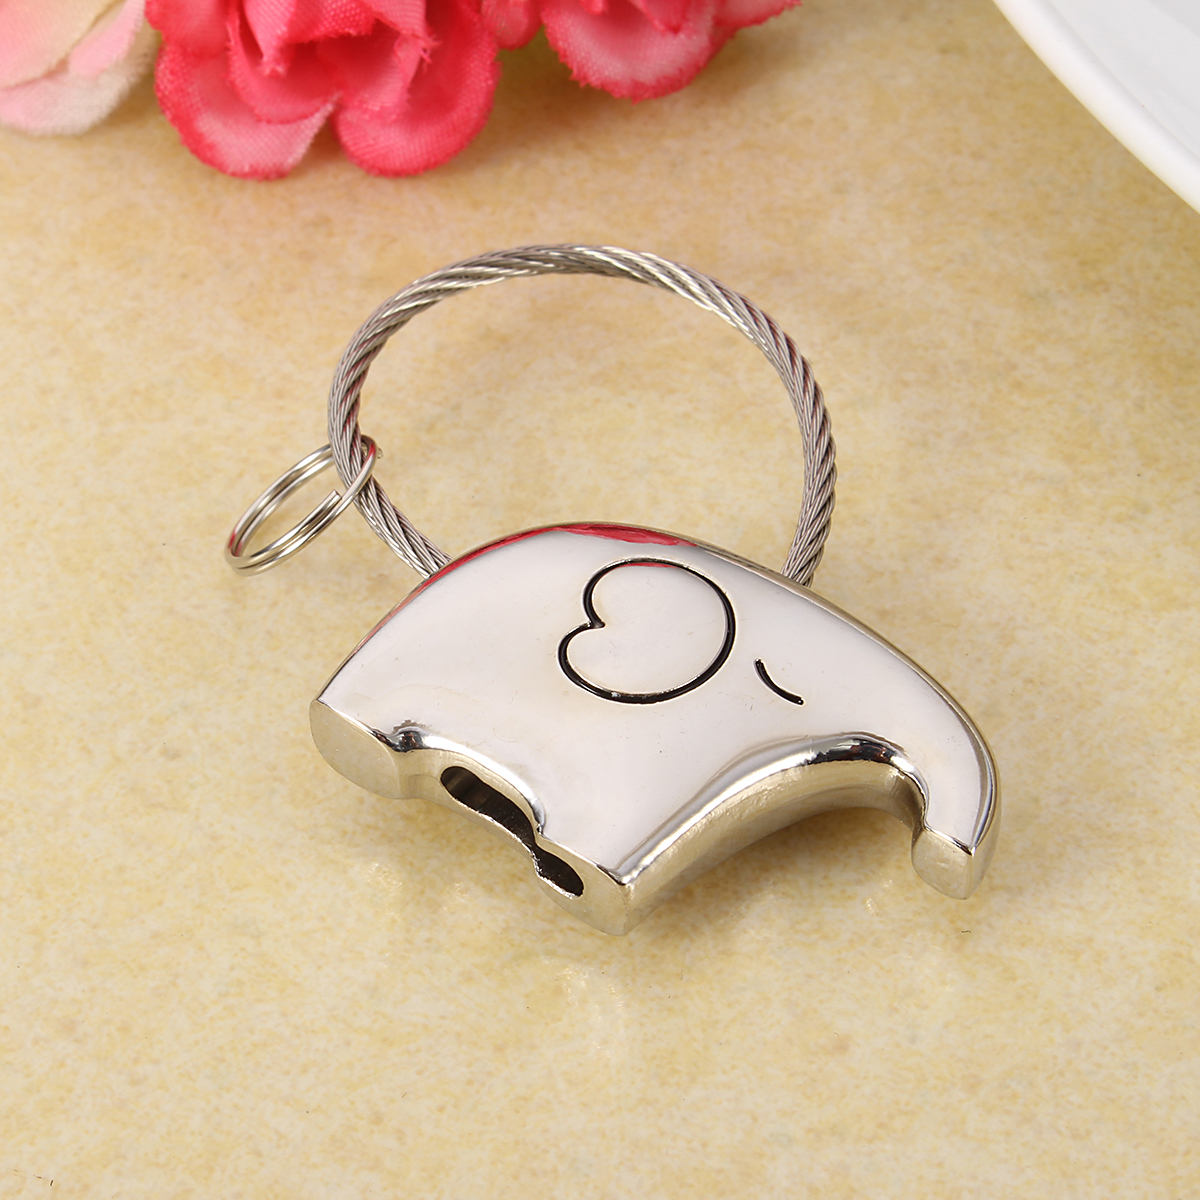 Kiss-Elephant-Steel-Ring-Love-Heart-Car-Key-Chain-Special-Gift-1126482